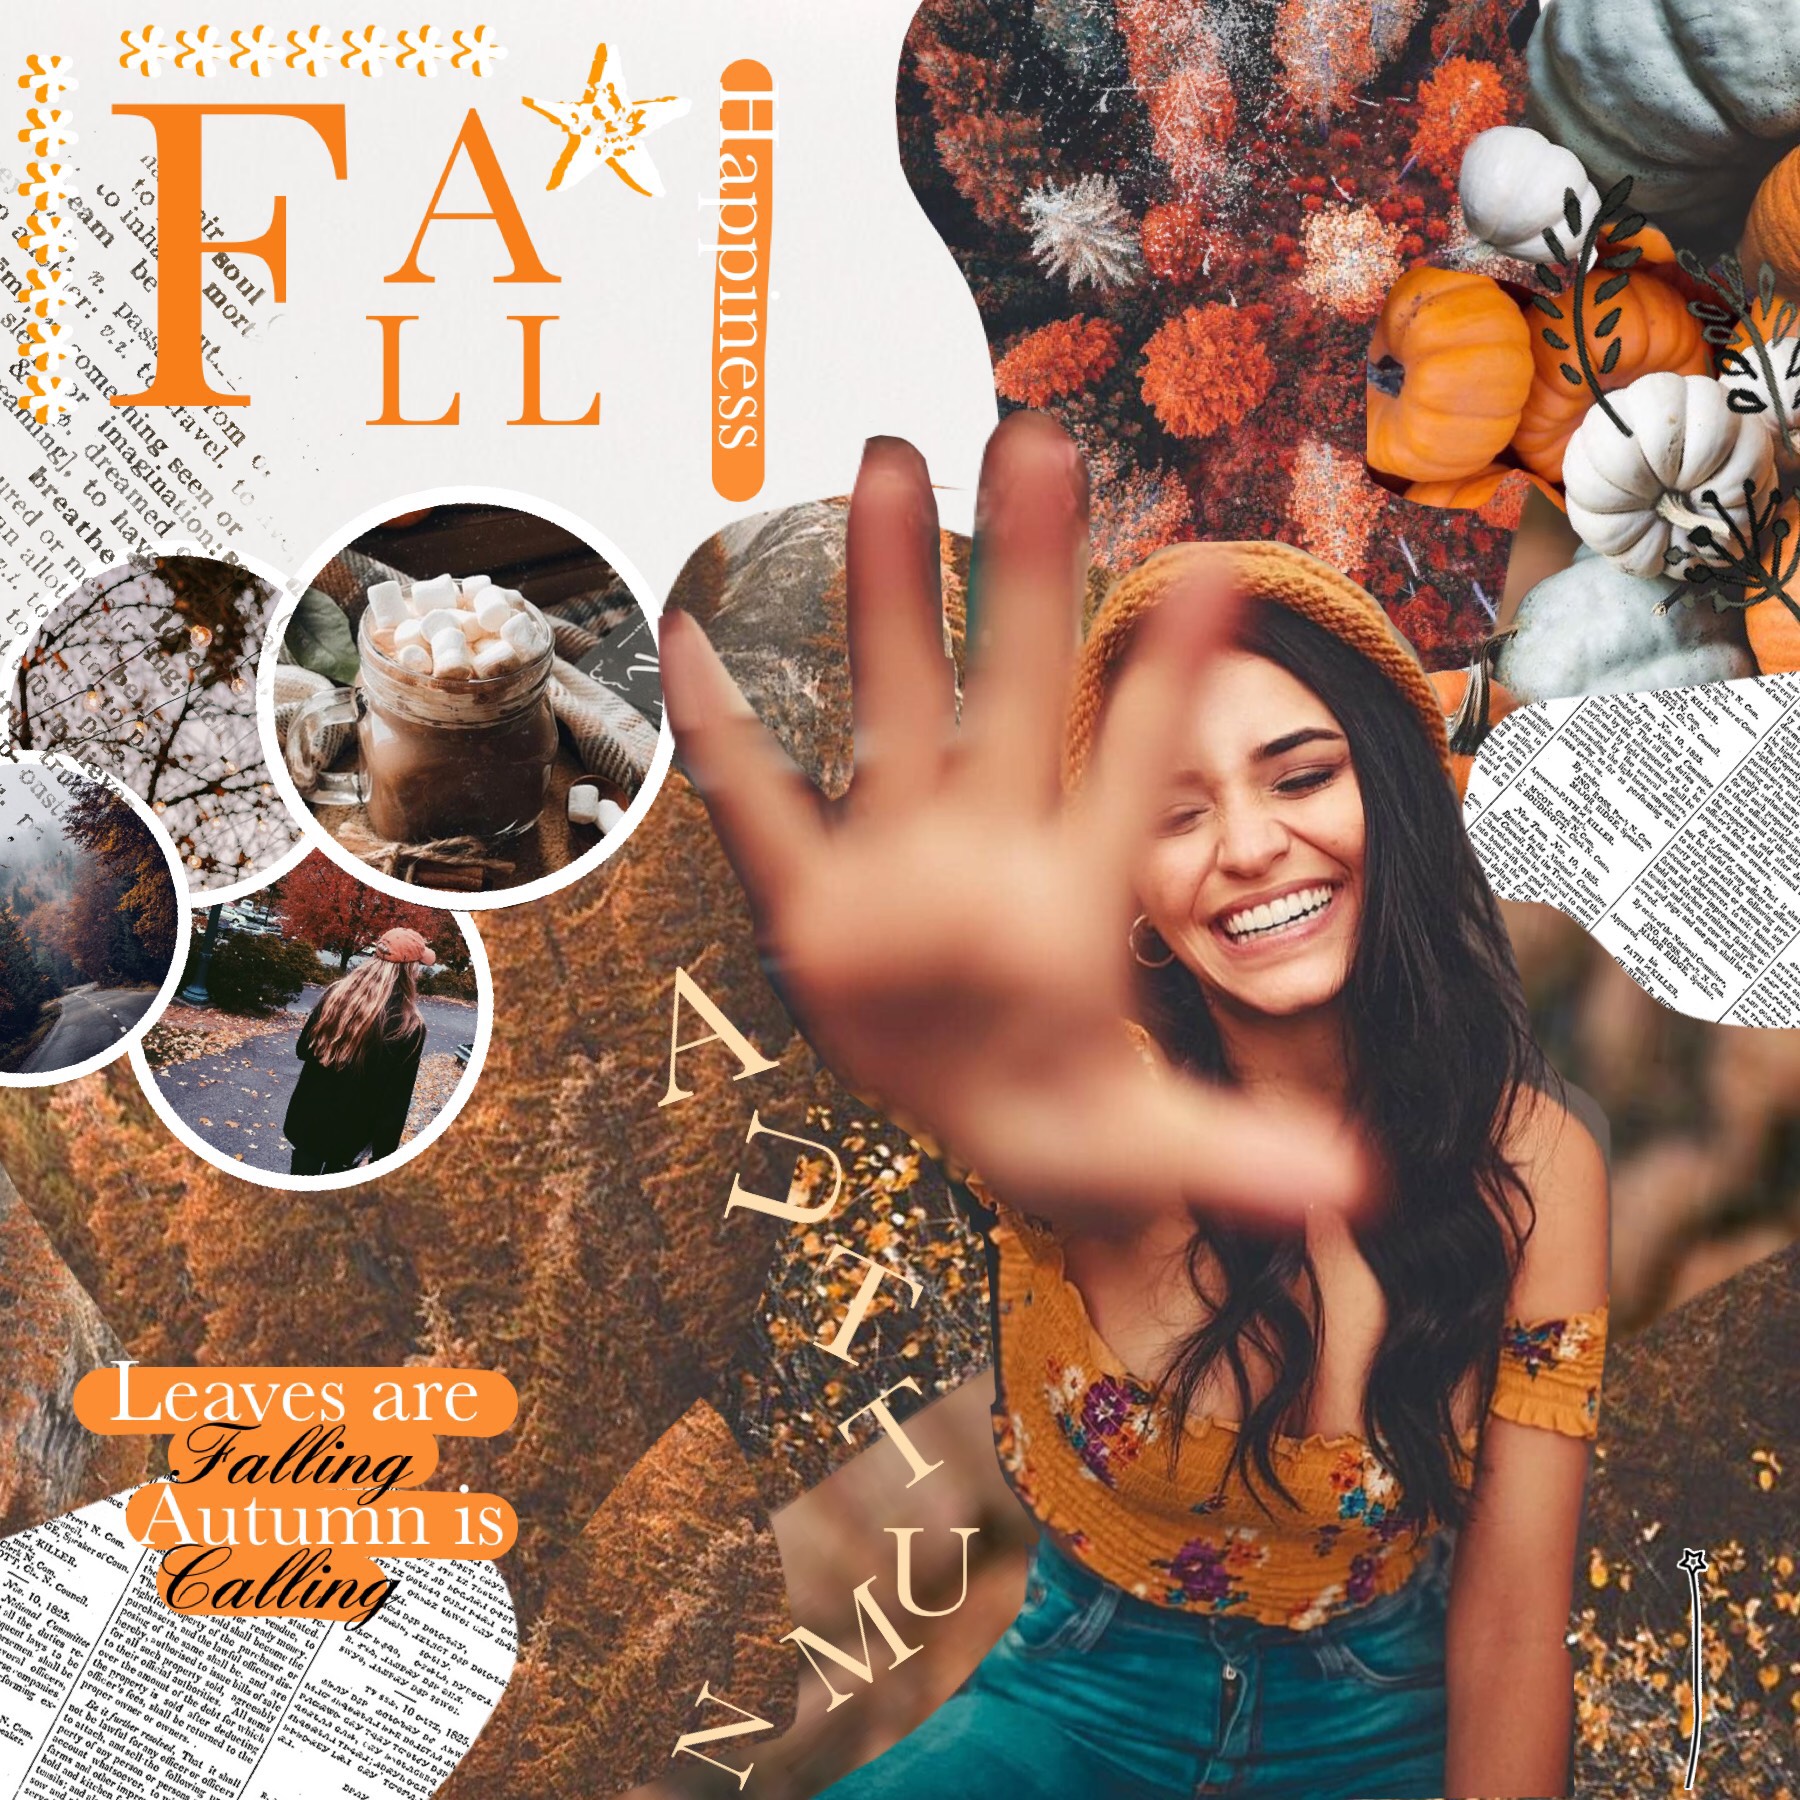 🍂🍁Tap🍂🍁

Fall is here!